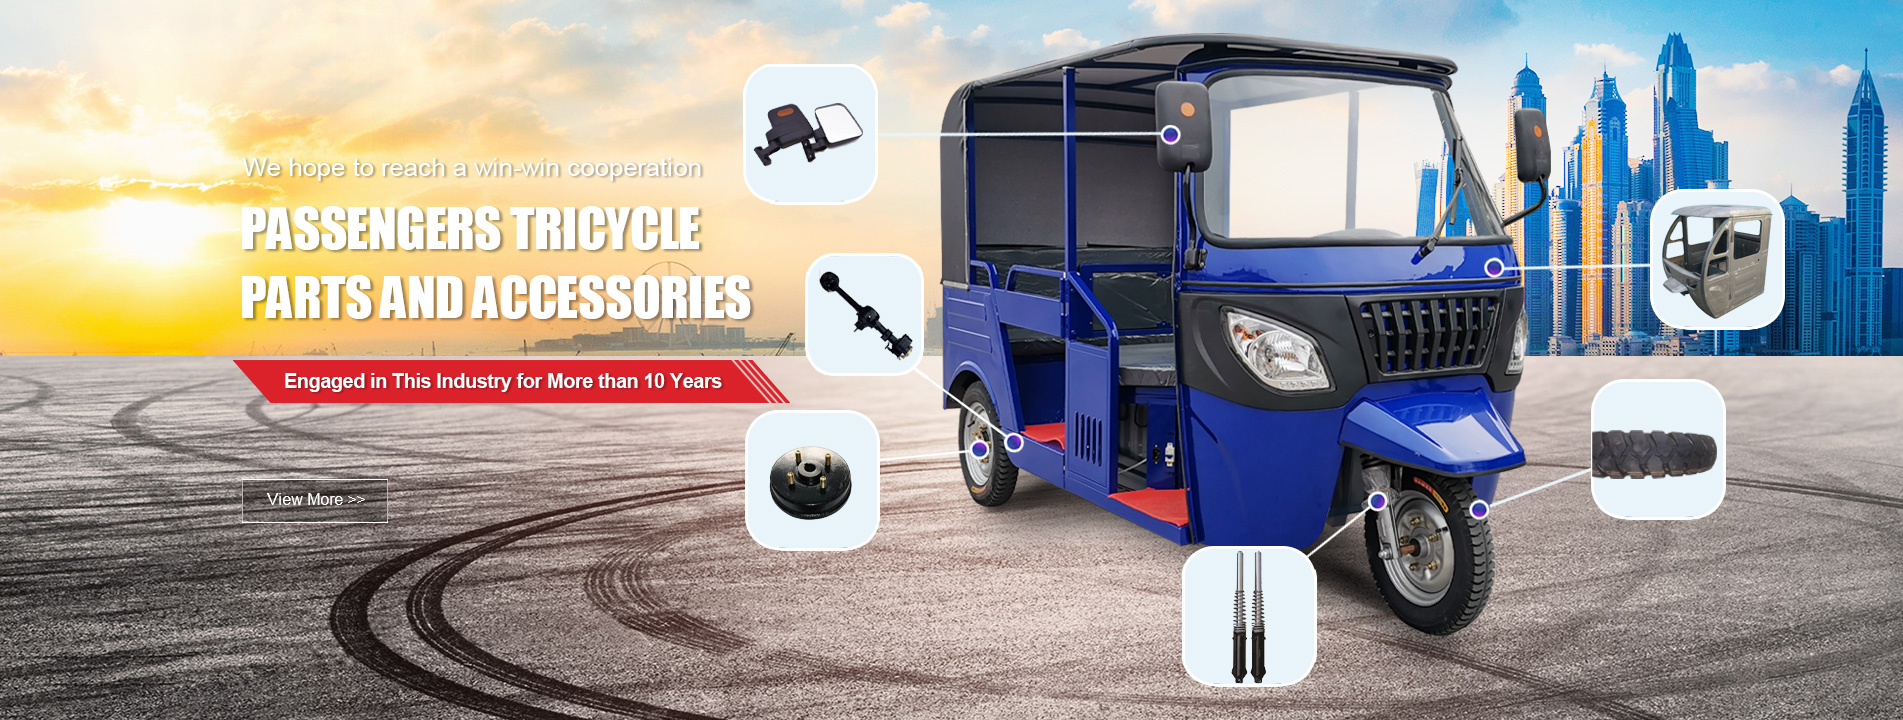 PASSENGERS TRICYCLE PARTS AND ACCESSORIES